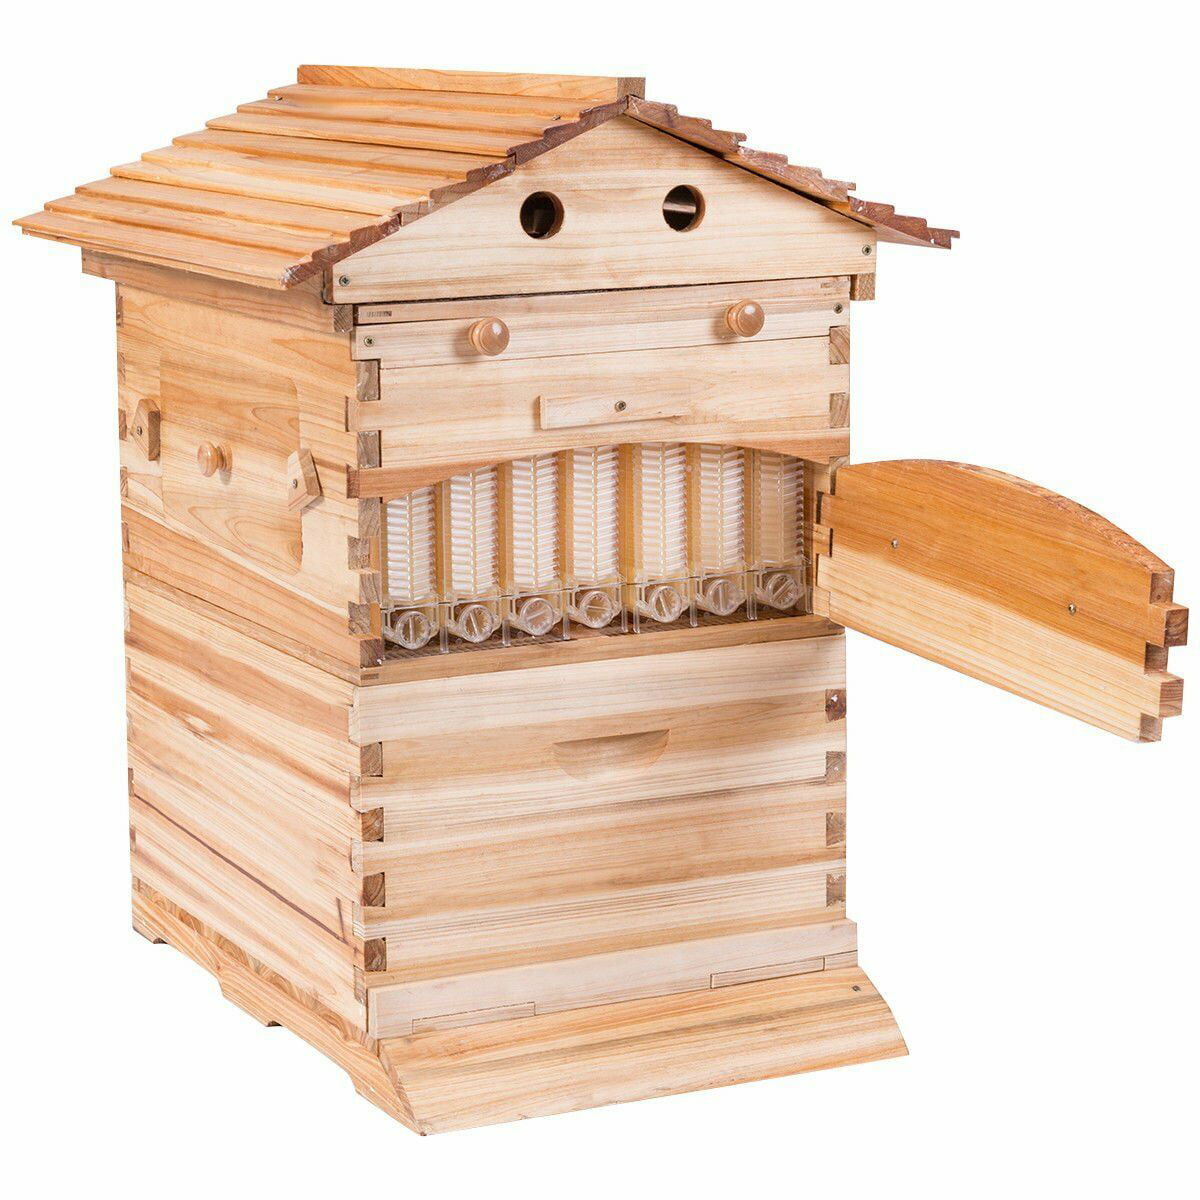 Details about   Auto Honey Beehive Frames Beekeeping Kit Pollination Box Bee Hive King Box 